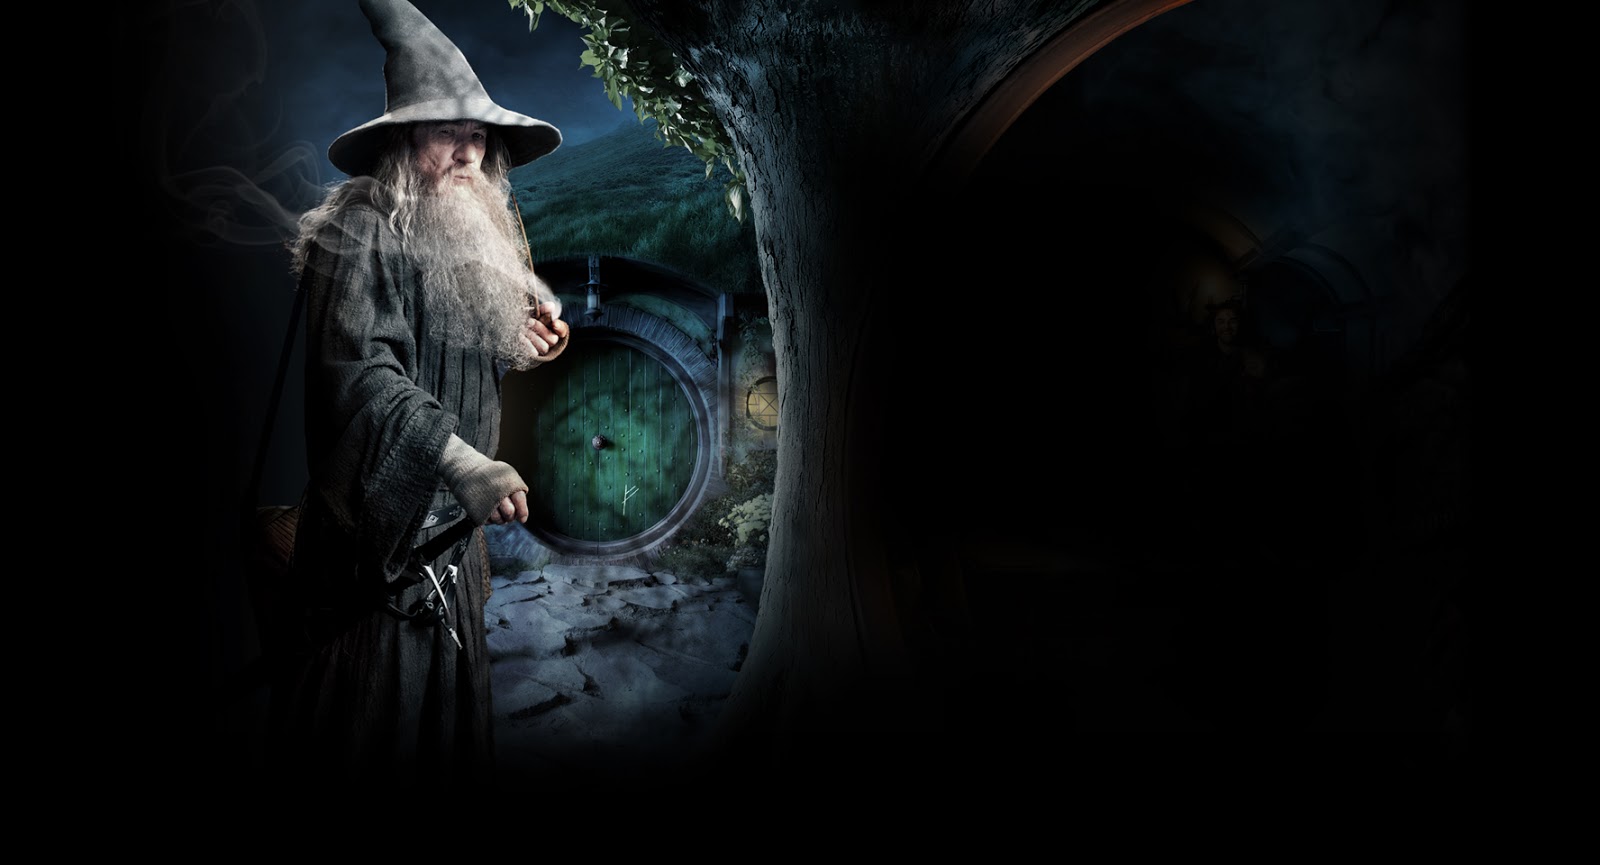  LEAGUE OF FICTION The Hobbit Gandalf and Dwarf Company HD Wallpapers